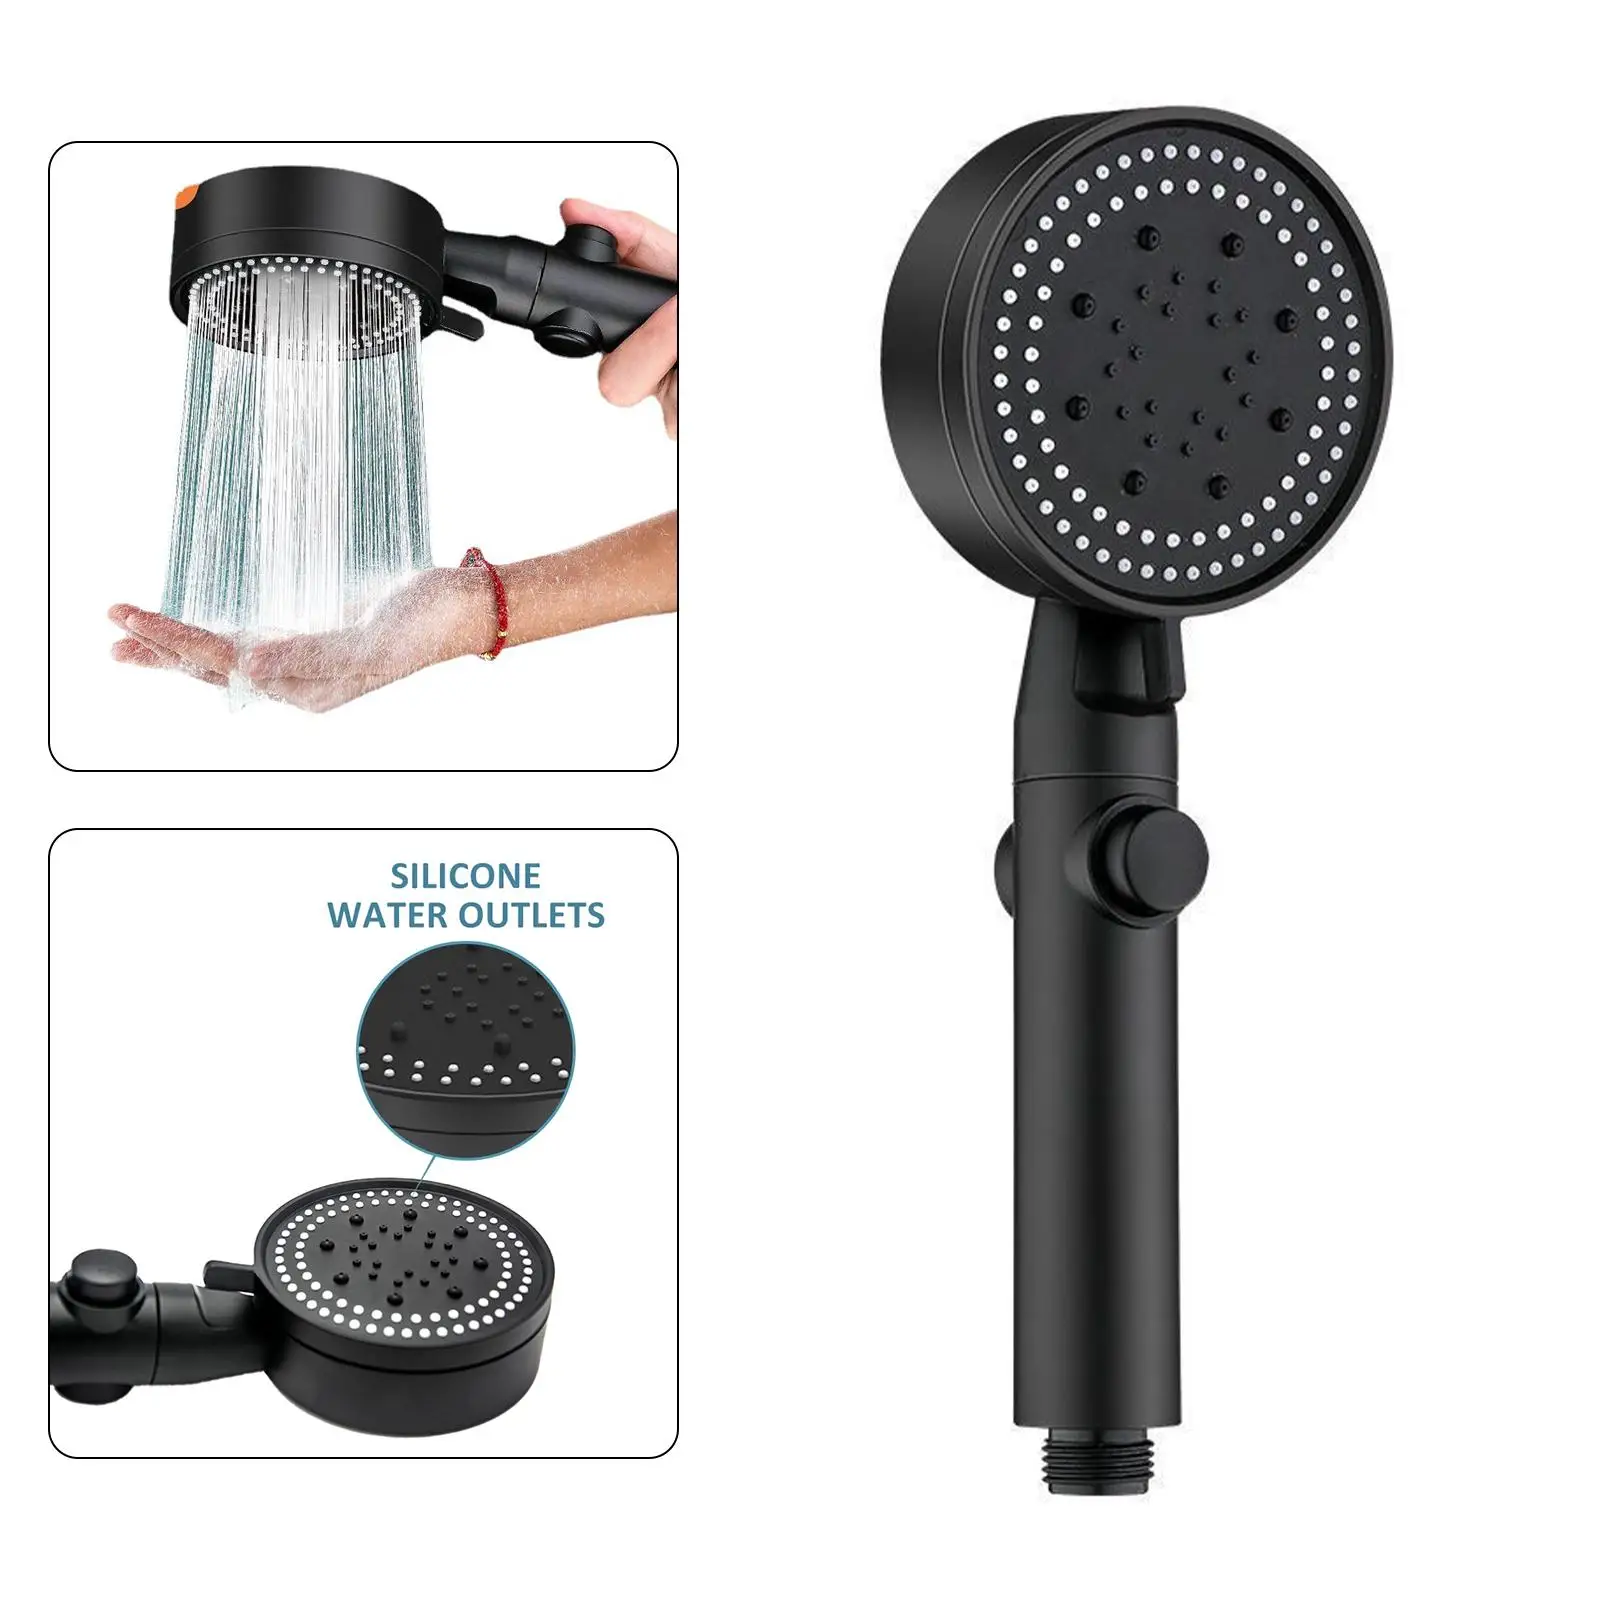 Shower Head 5 Mode Multifunctional Accessories Showerhead for Shower Home